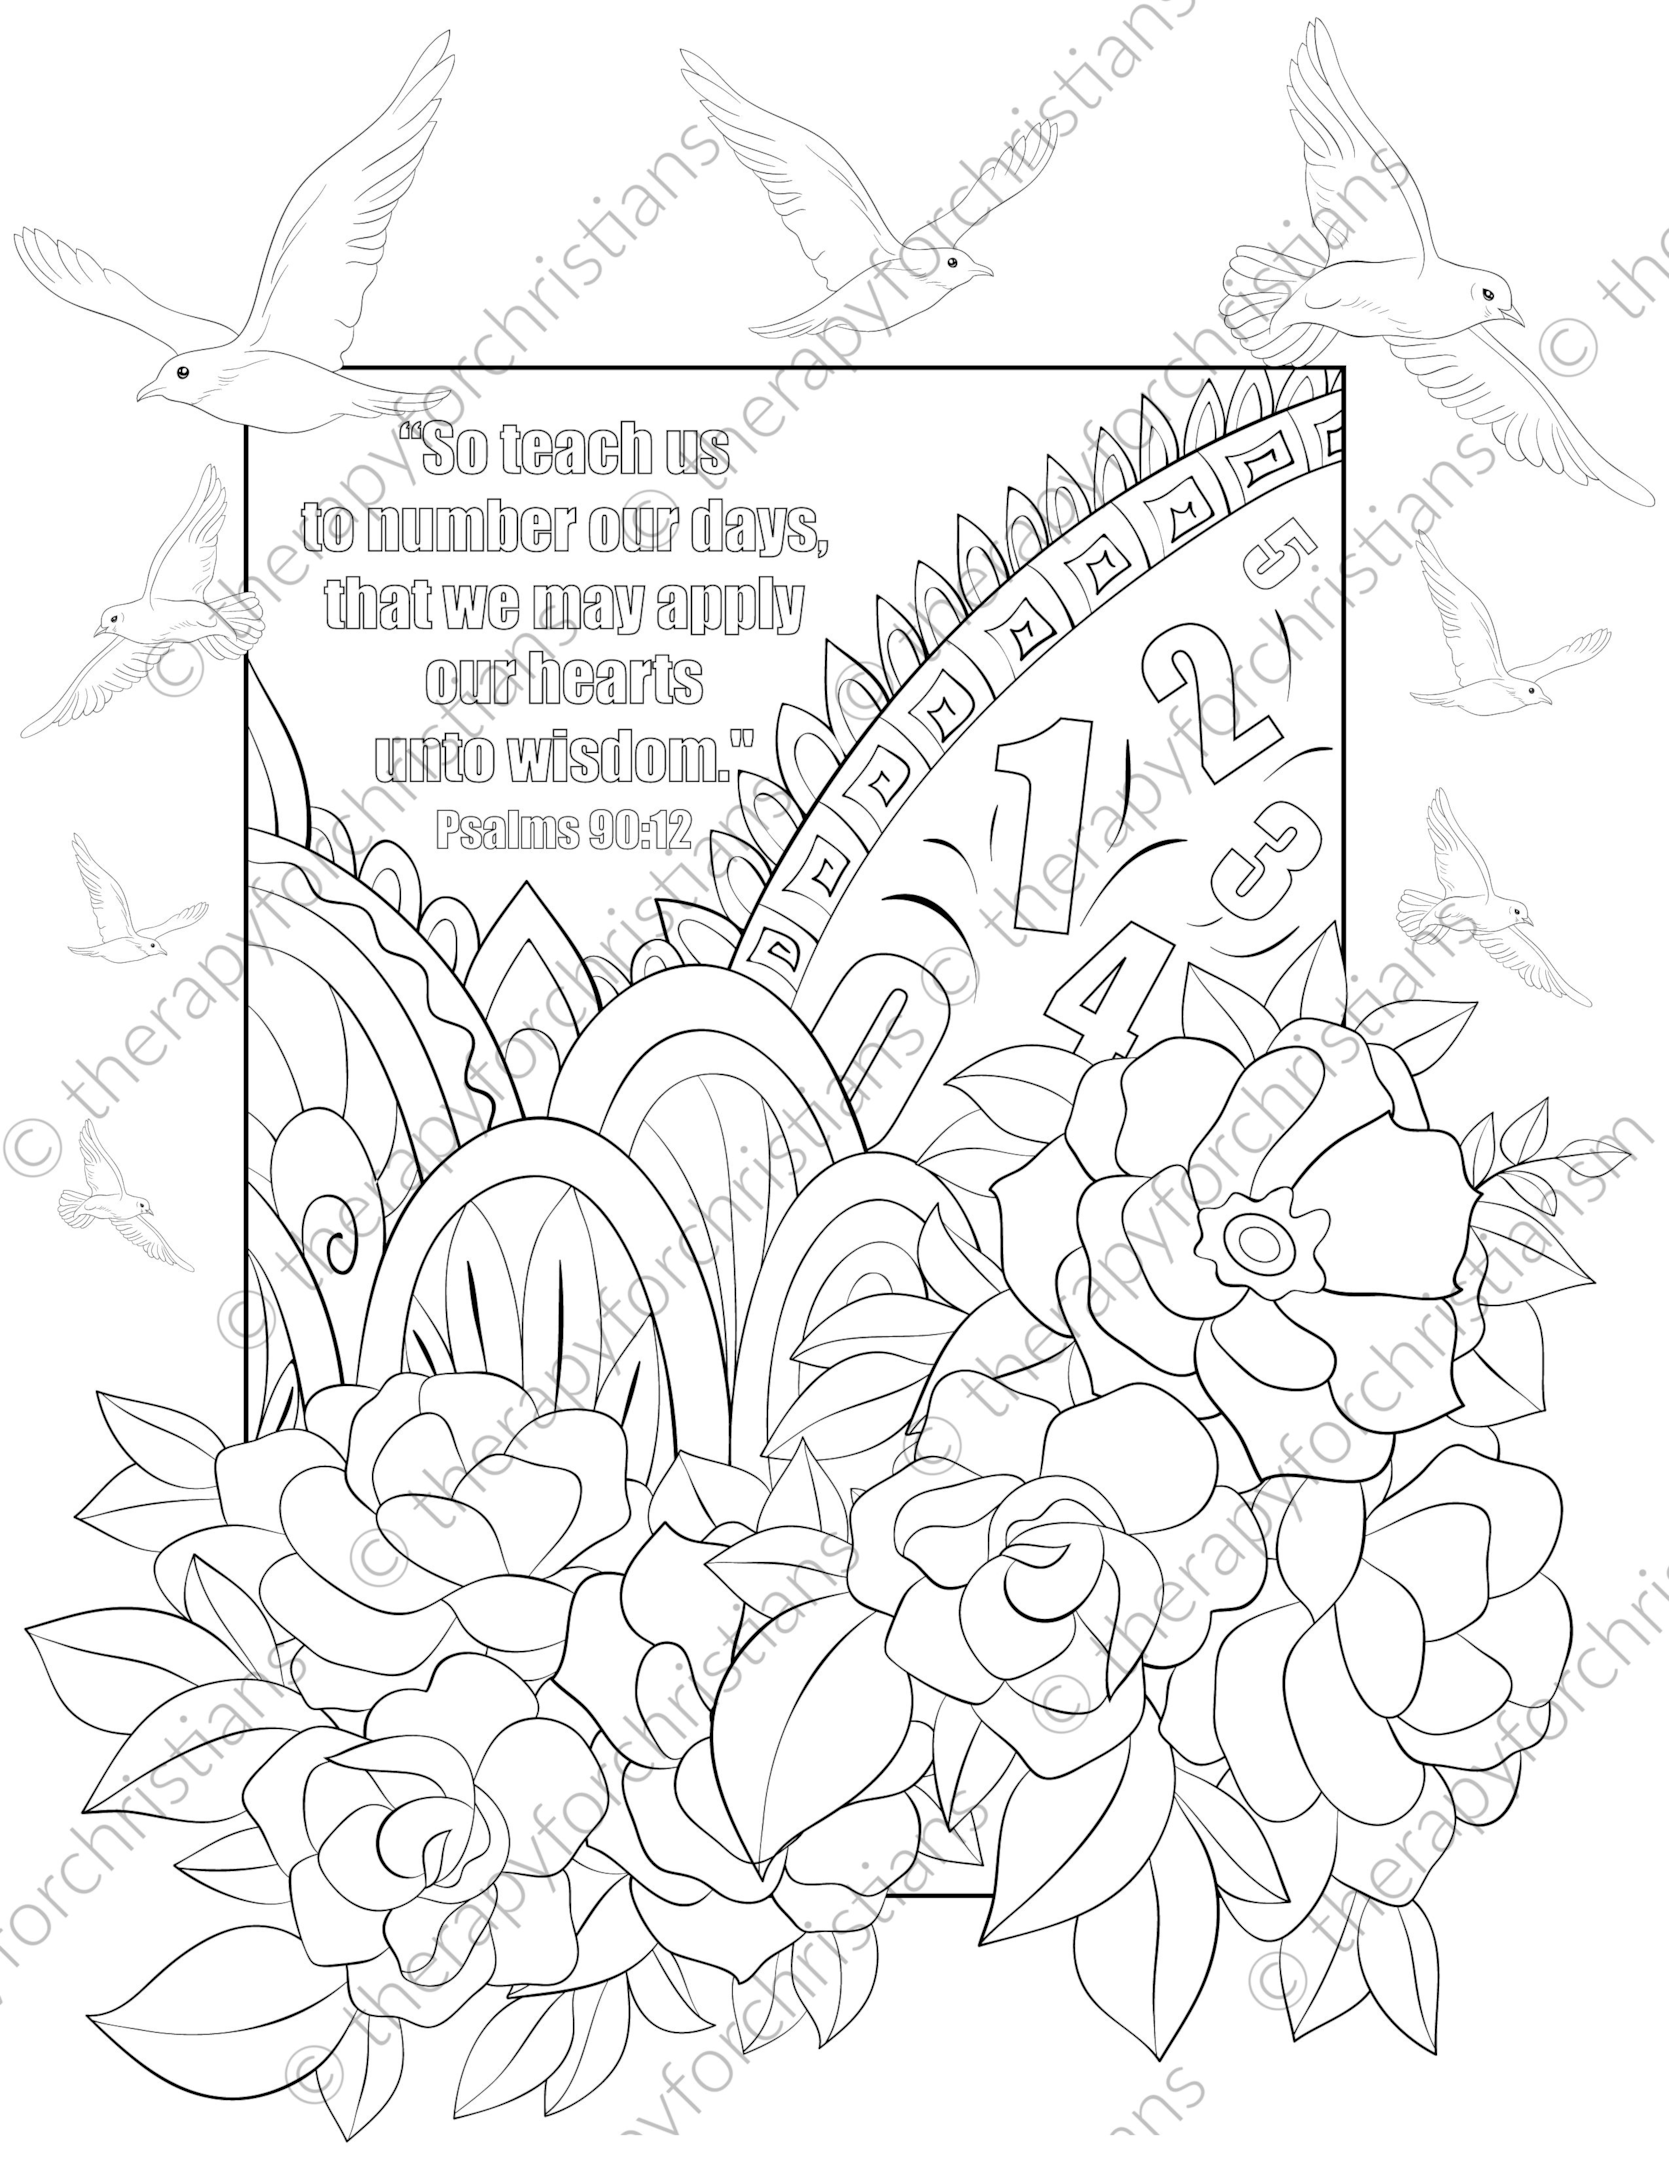 Psalm 90:12 Bible verse Coloring Pages 